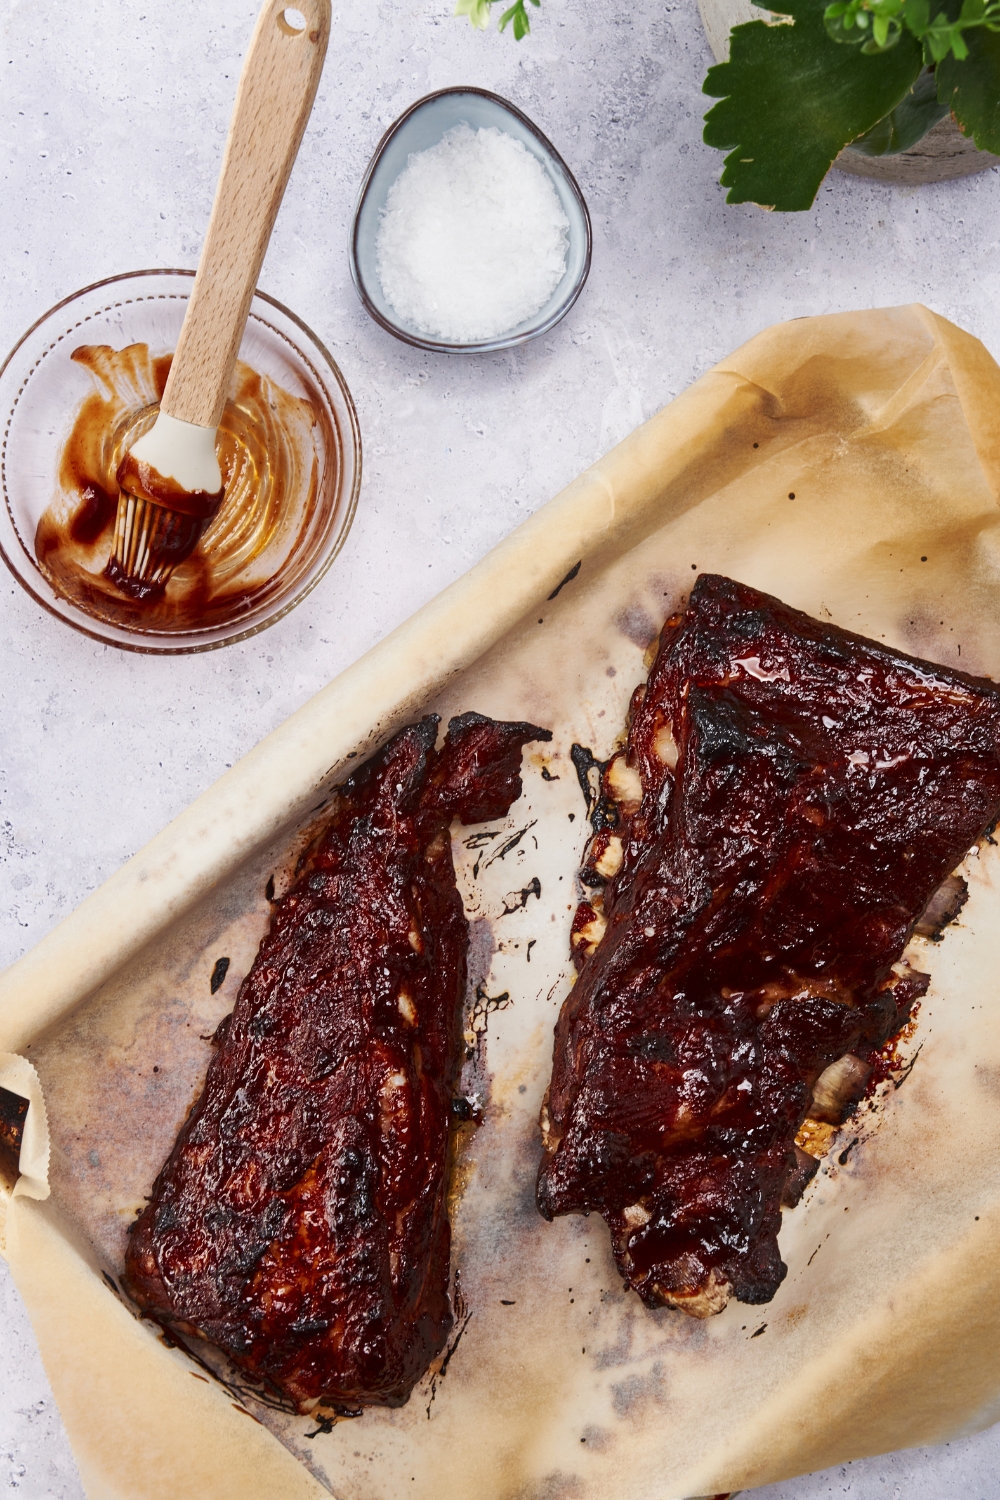 Overhead view of baked ribs covered in barbecue sauce. The ribs are on a baking sheet lined with parchment paper and there is an empty bowl of barbecue sauce with a basting brush next to the baking sheet.